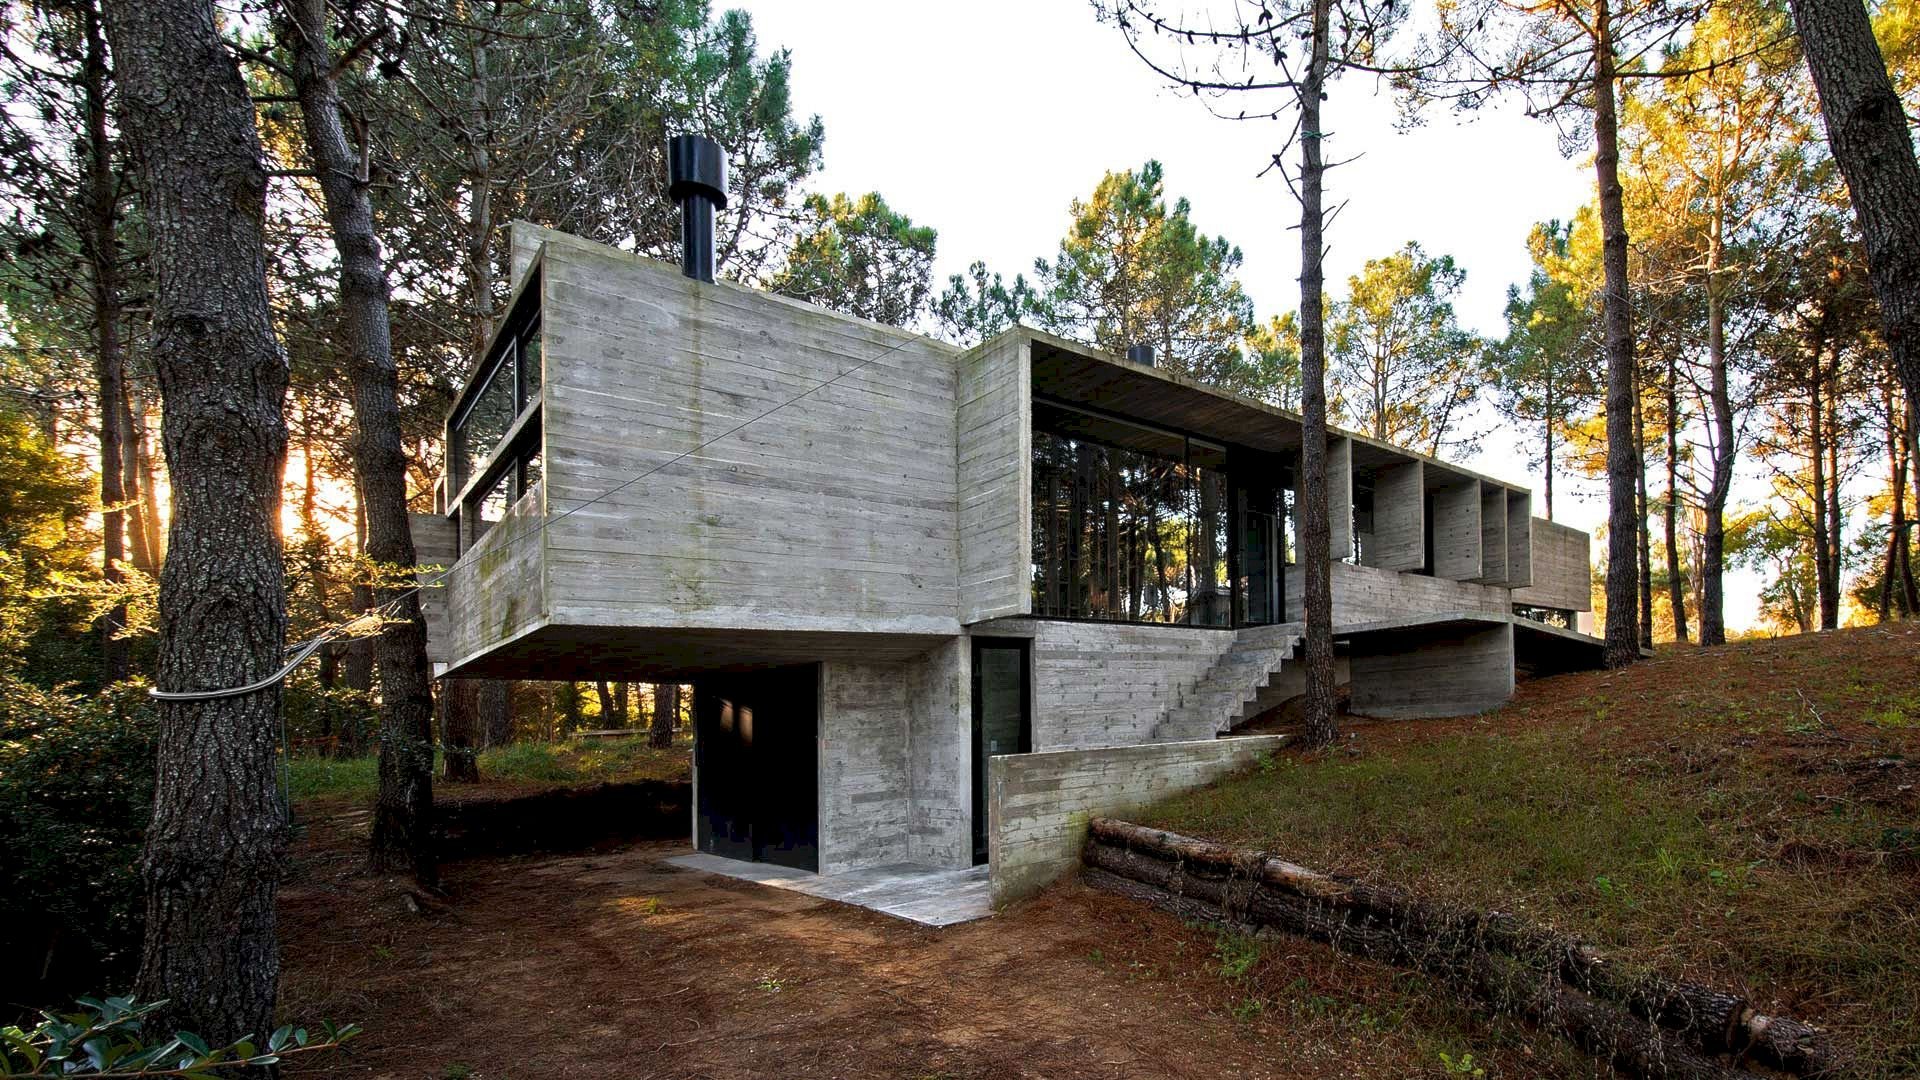 Valeria House: A Family House Built with Exposed Concrete and Glass